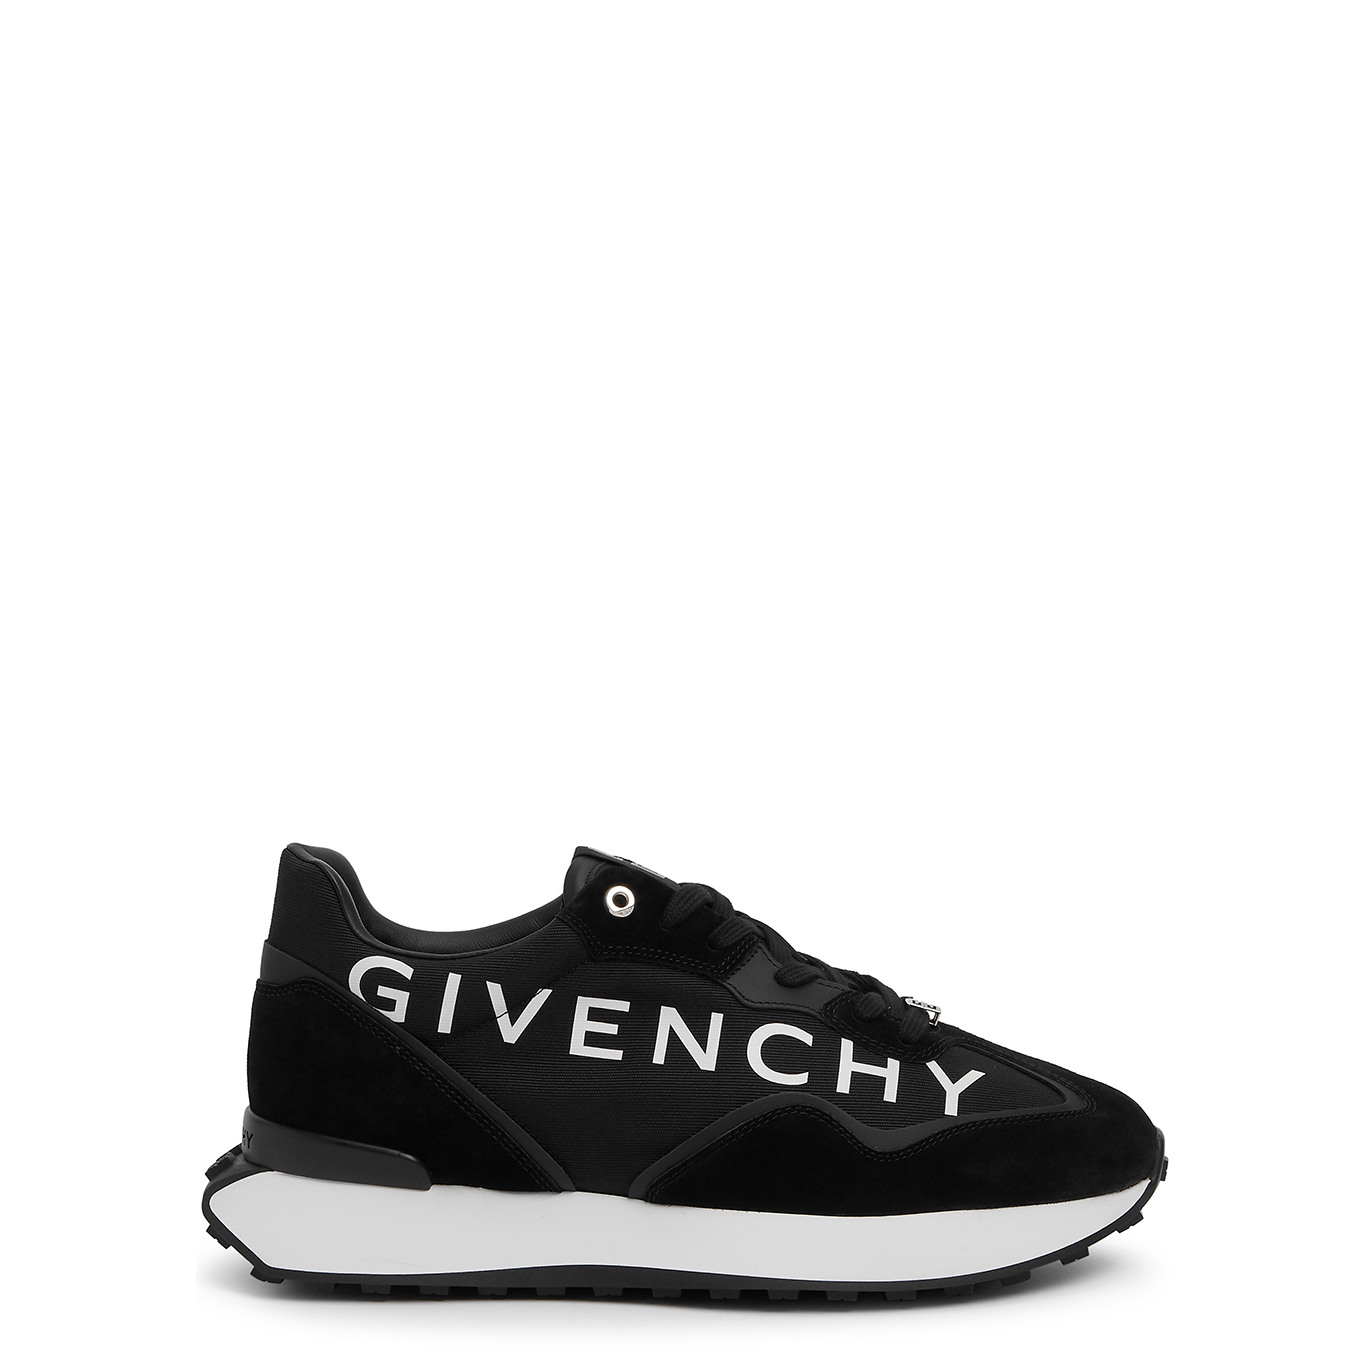 Givenchy Giv Runner Black Panelled Canvas Sneakers - Black And White - 8